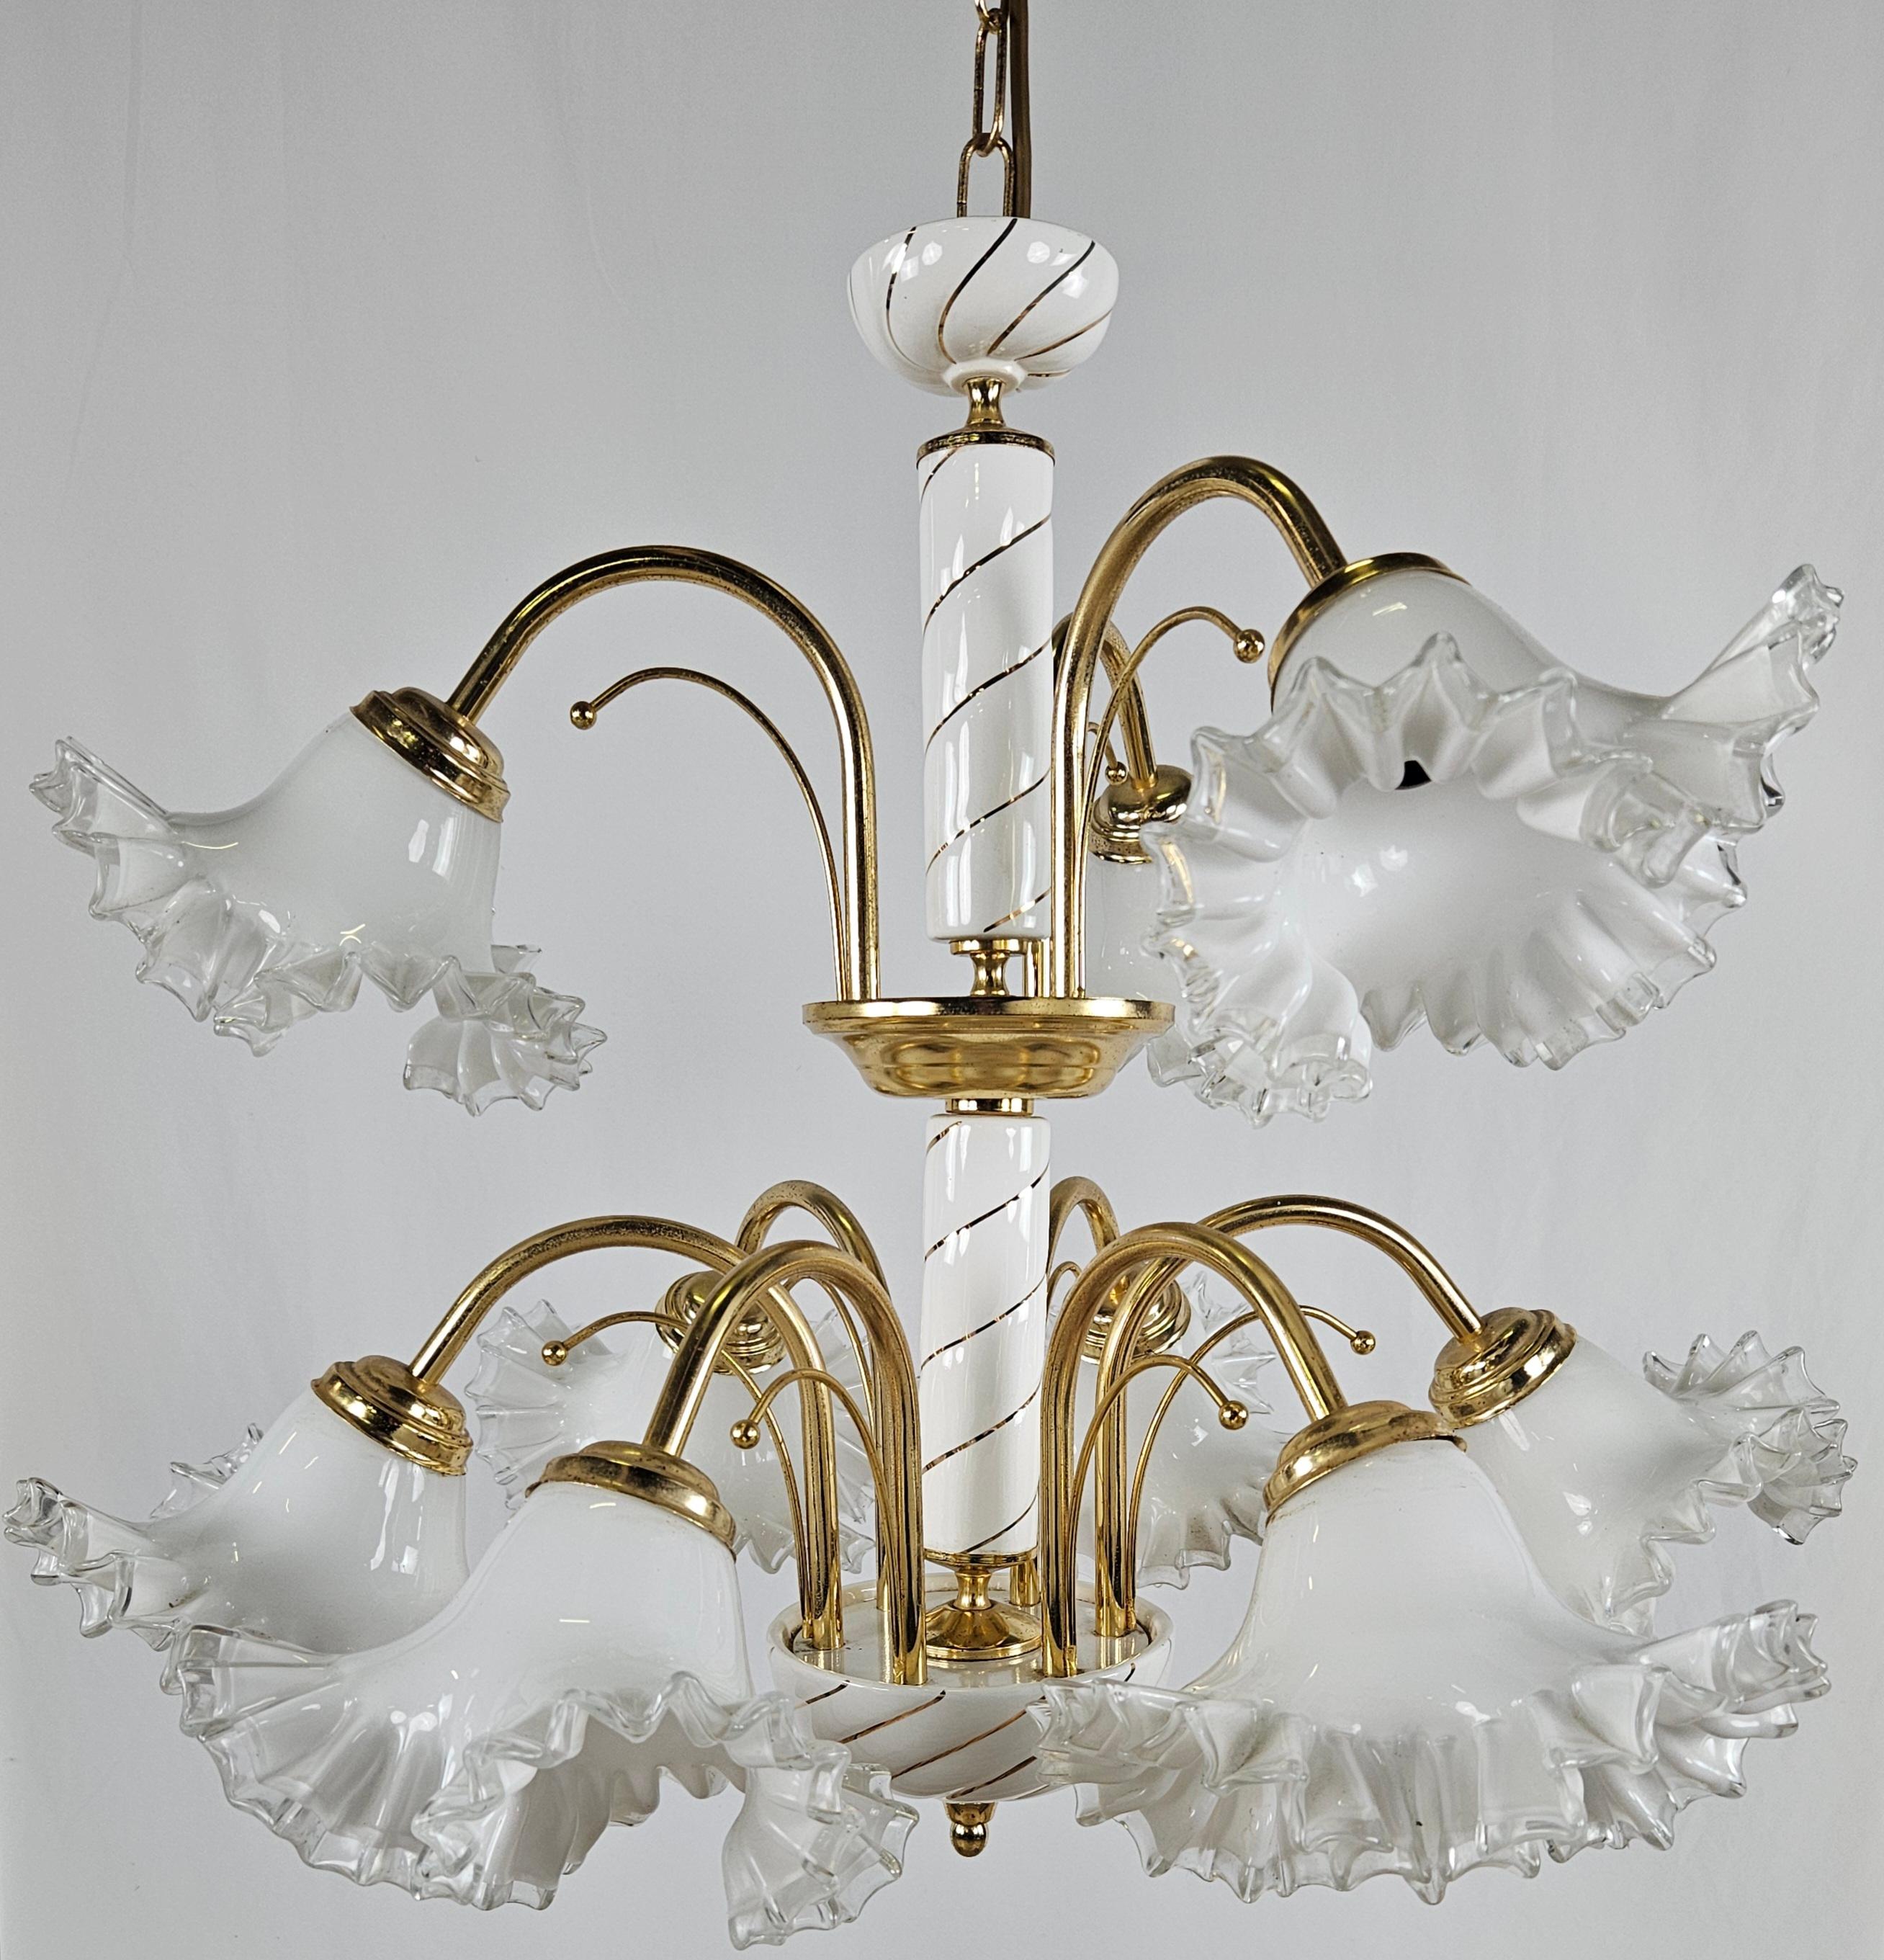 Impressive 9-point chandelier with a worked ceramic and brass frame, handkerchief-worked Murano glass ceiling lights.

Very elegant, suitable for rooms that need ample light with all kinds of decor, from modern to antique.

The lampshades/